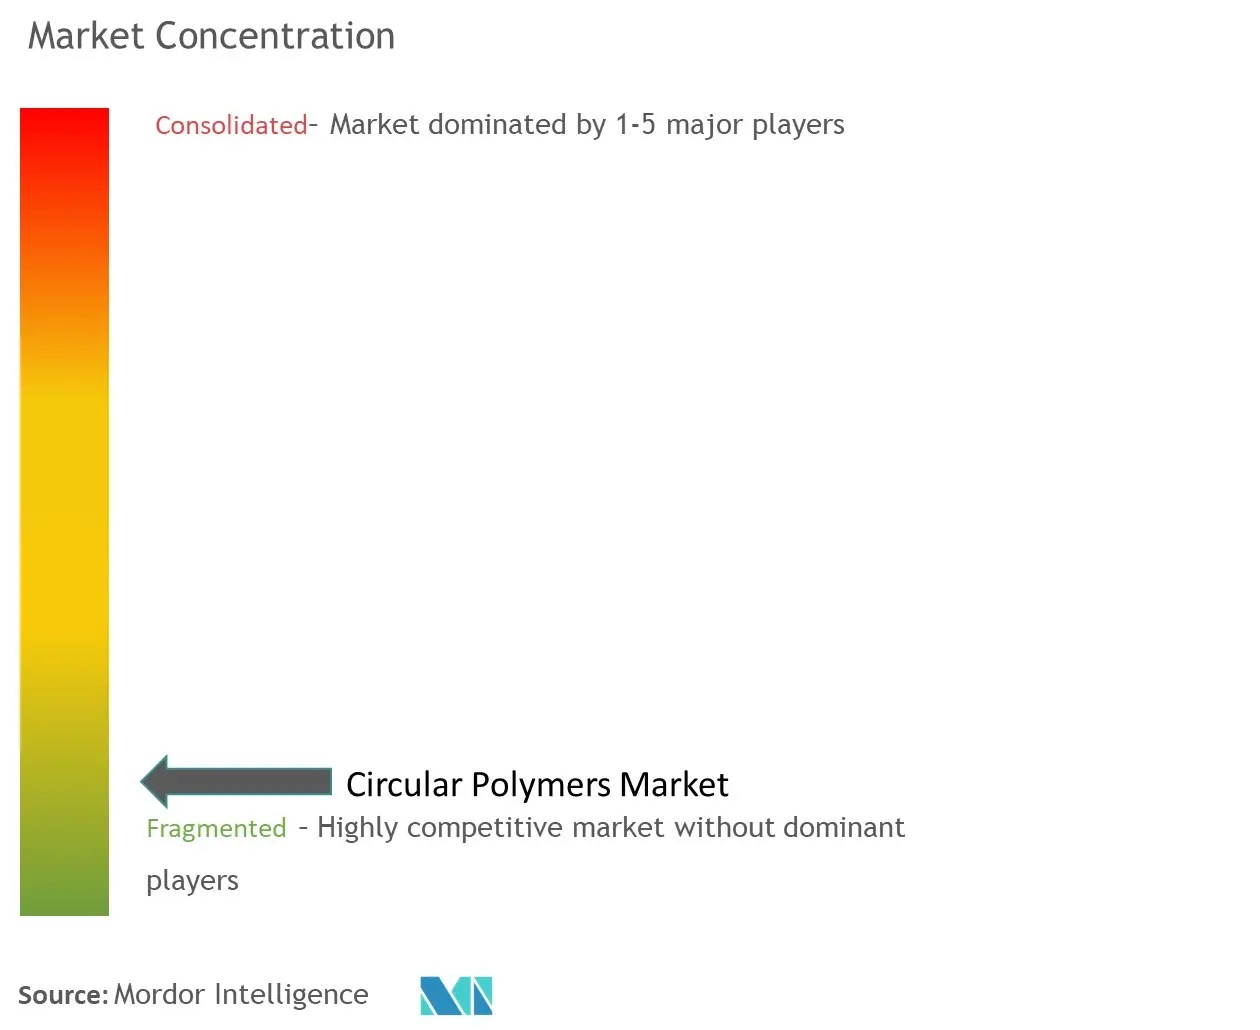 Circular Polymers Market Concentration